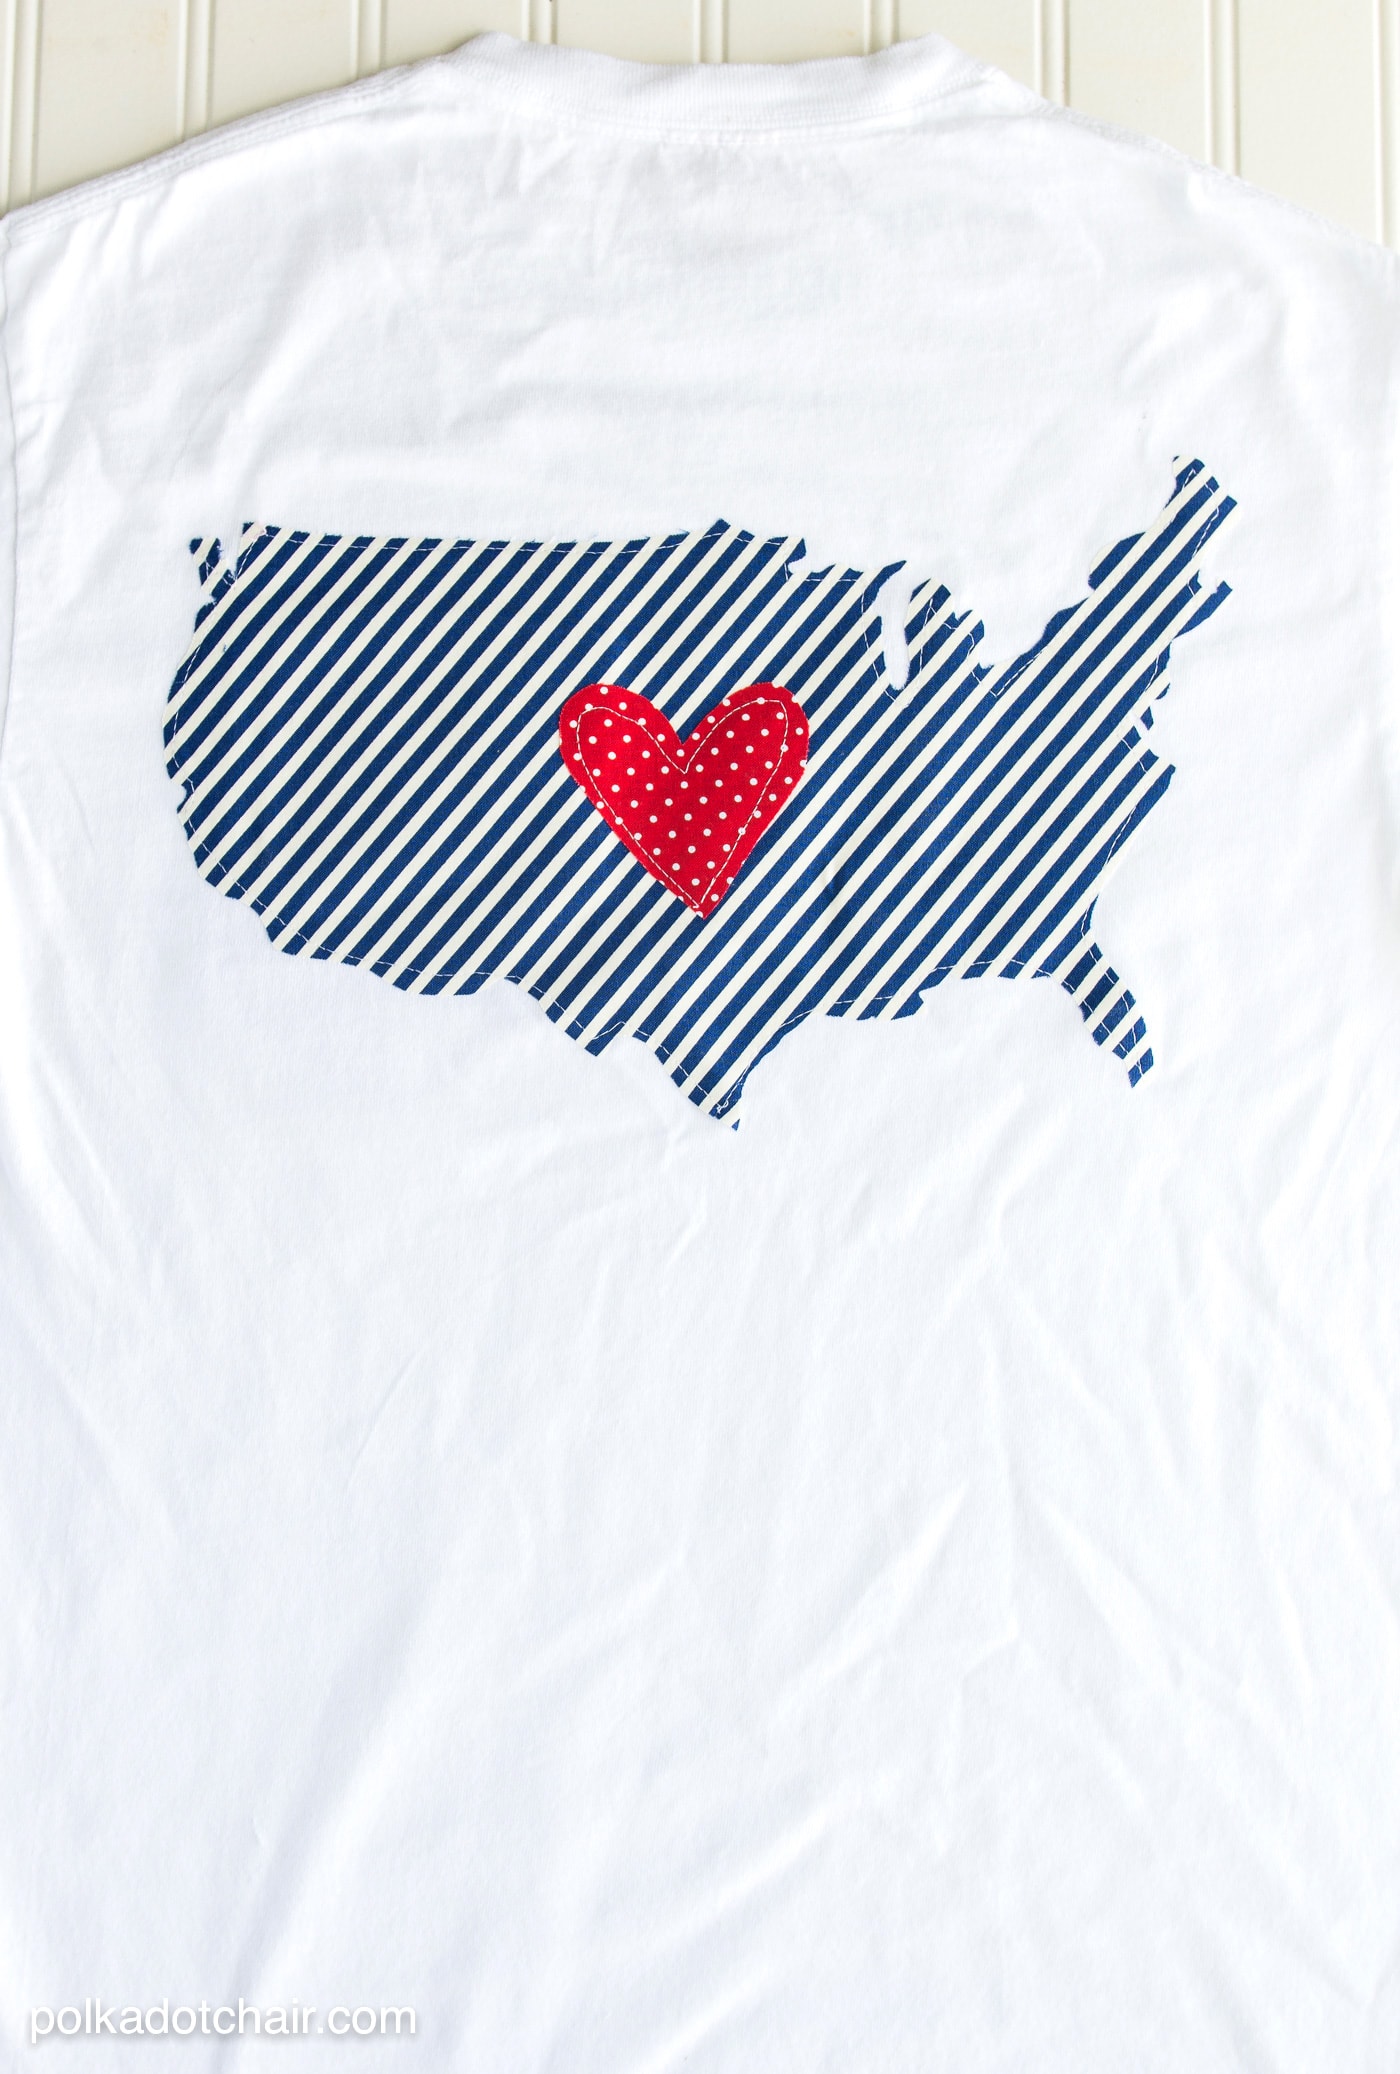 DIY Pocket Tee for the 4th of July - includes templates for the pocket and outline of the USA